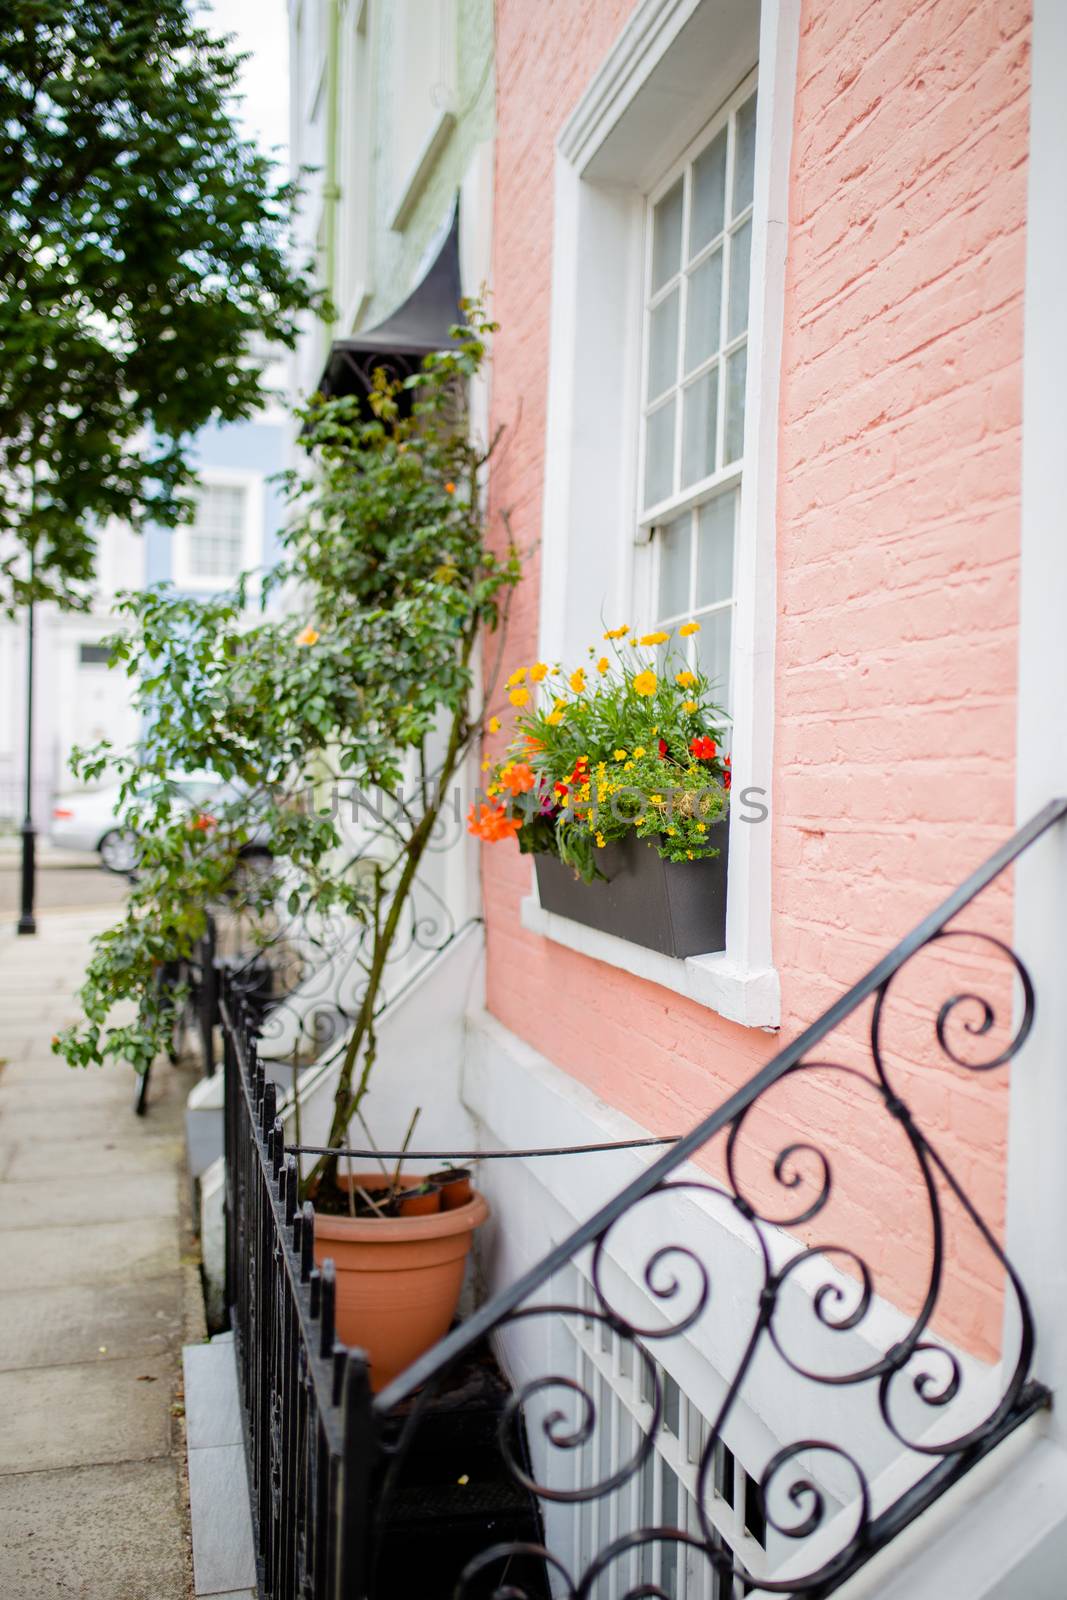 Portrait style picture of a small pink and white British house decorated with flowers and plants